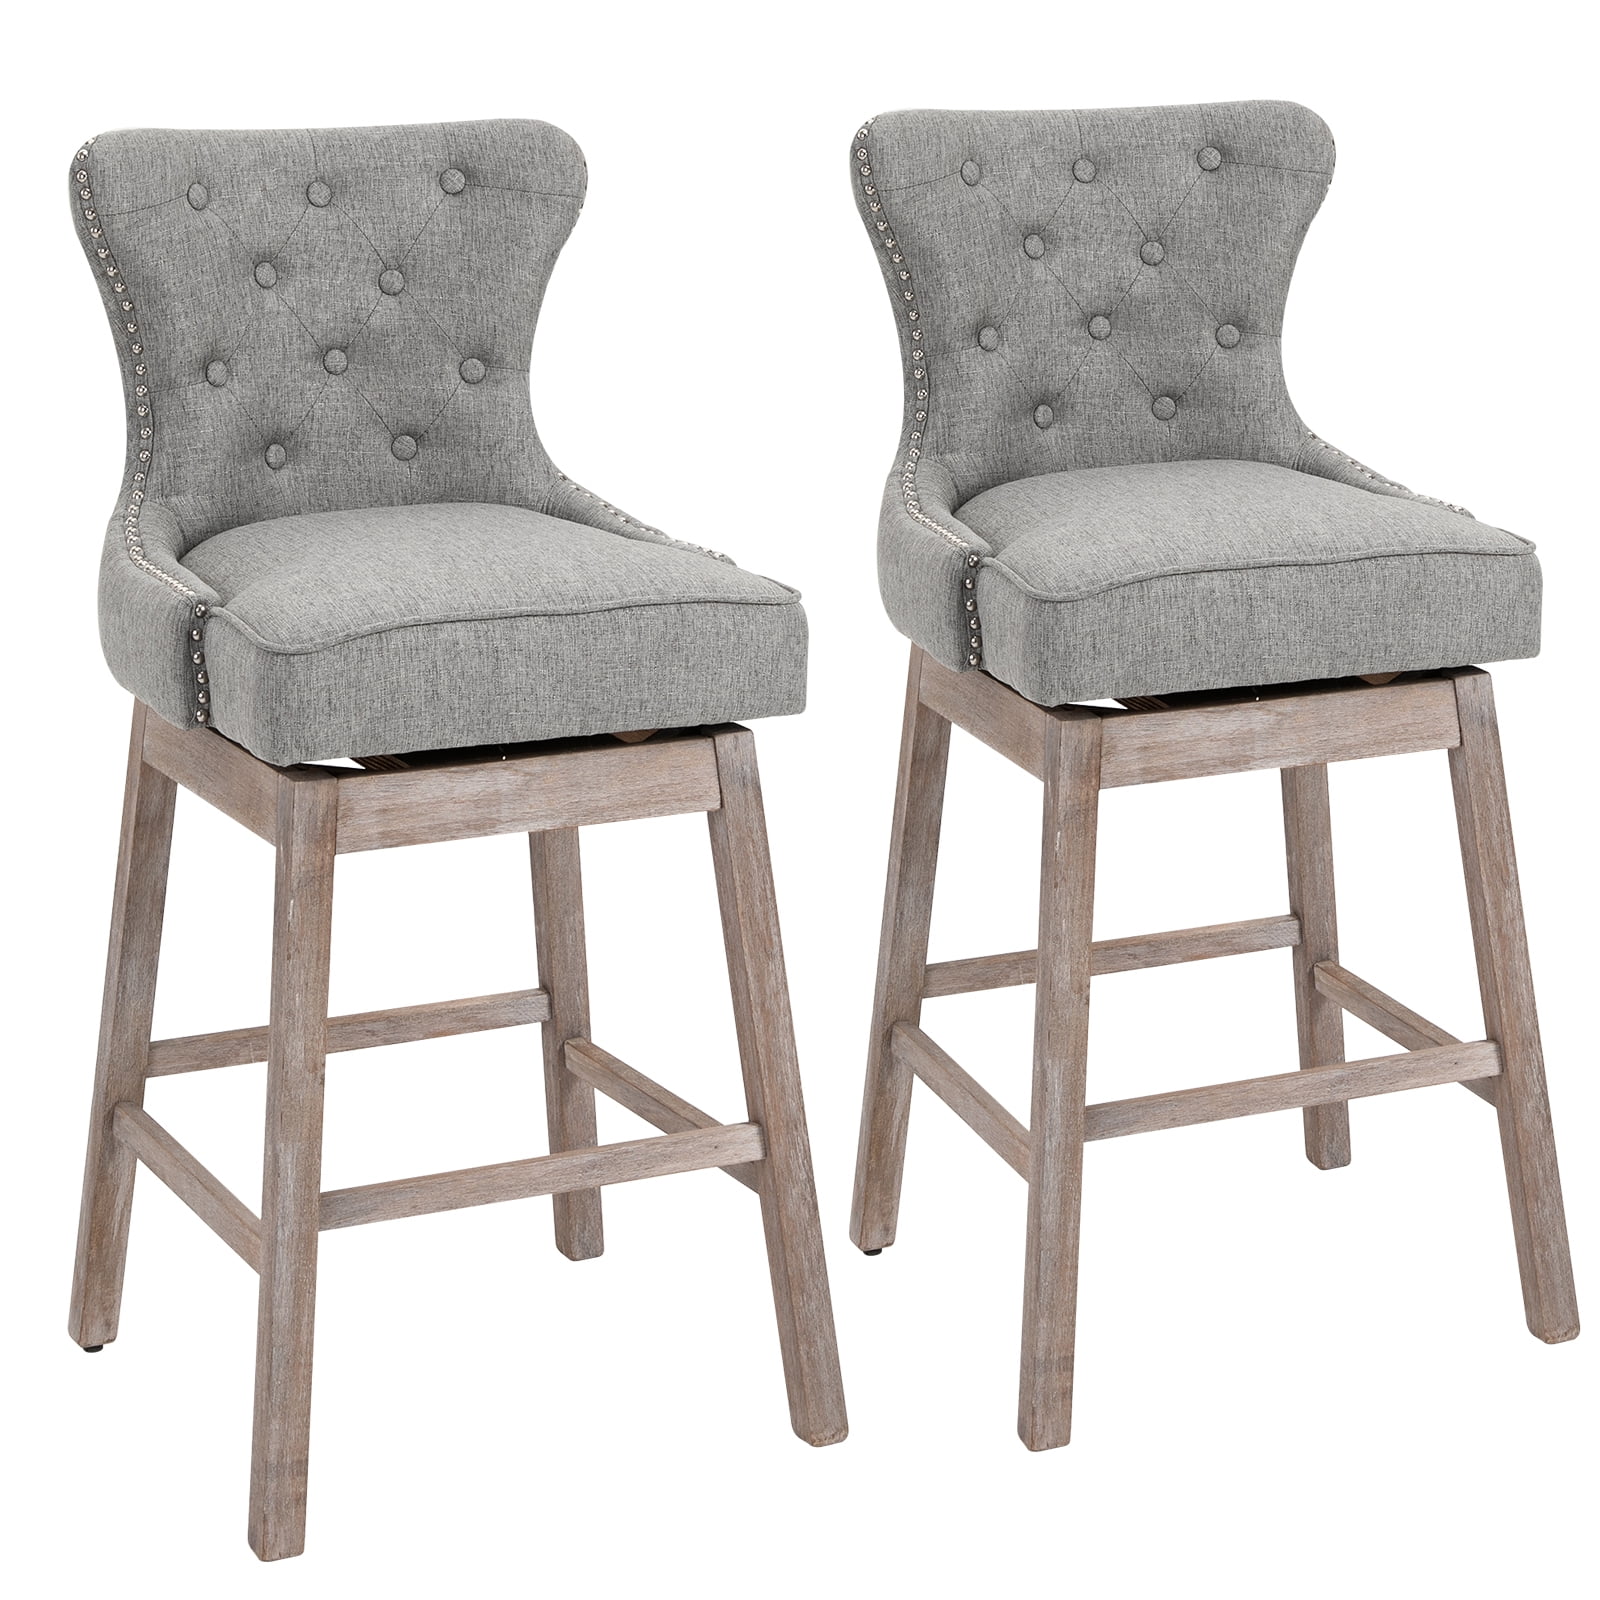 Light Grey HOMCOM Bar Stool Set of 2 Fabric Adjustable Height Armless Upholstered Counter Chairs with Swivel Seat